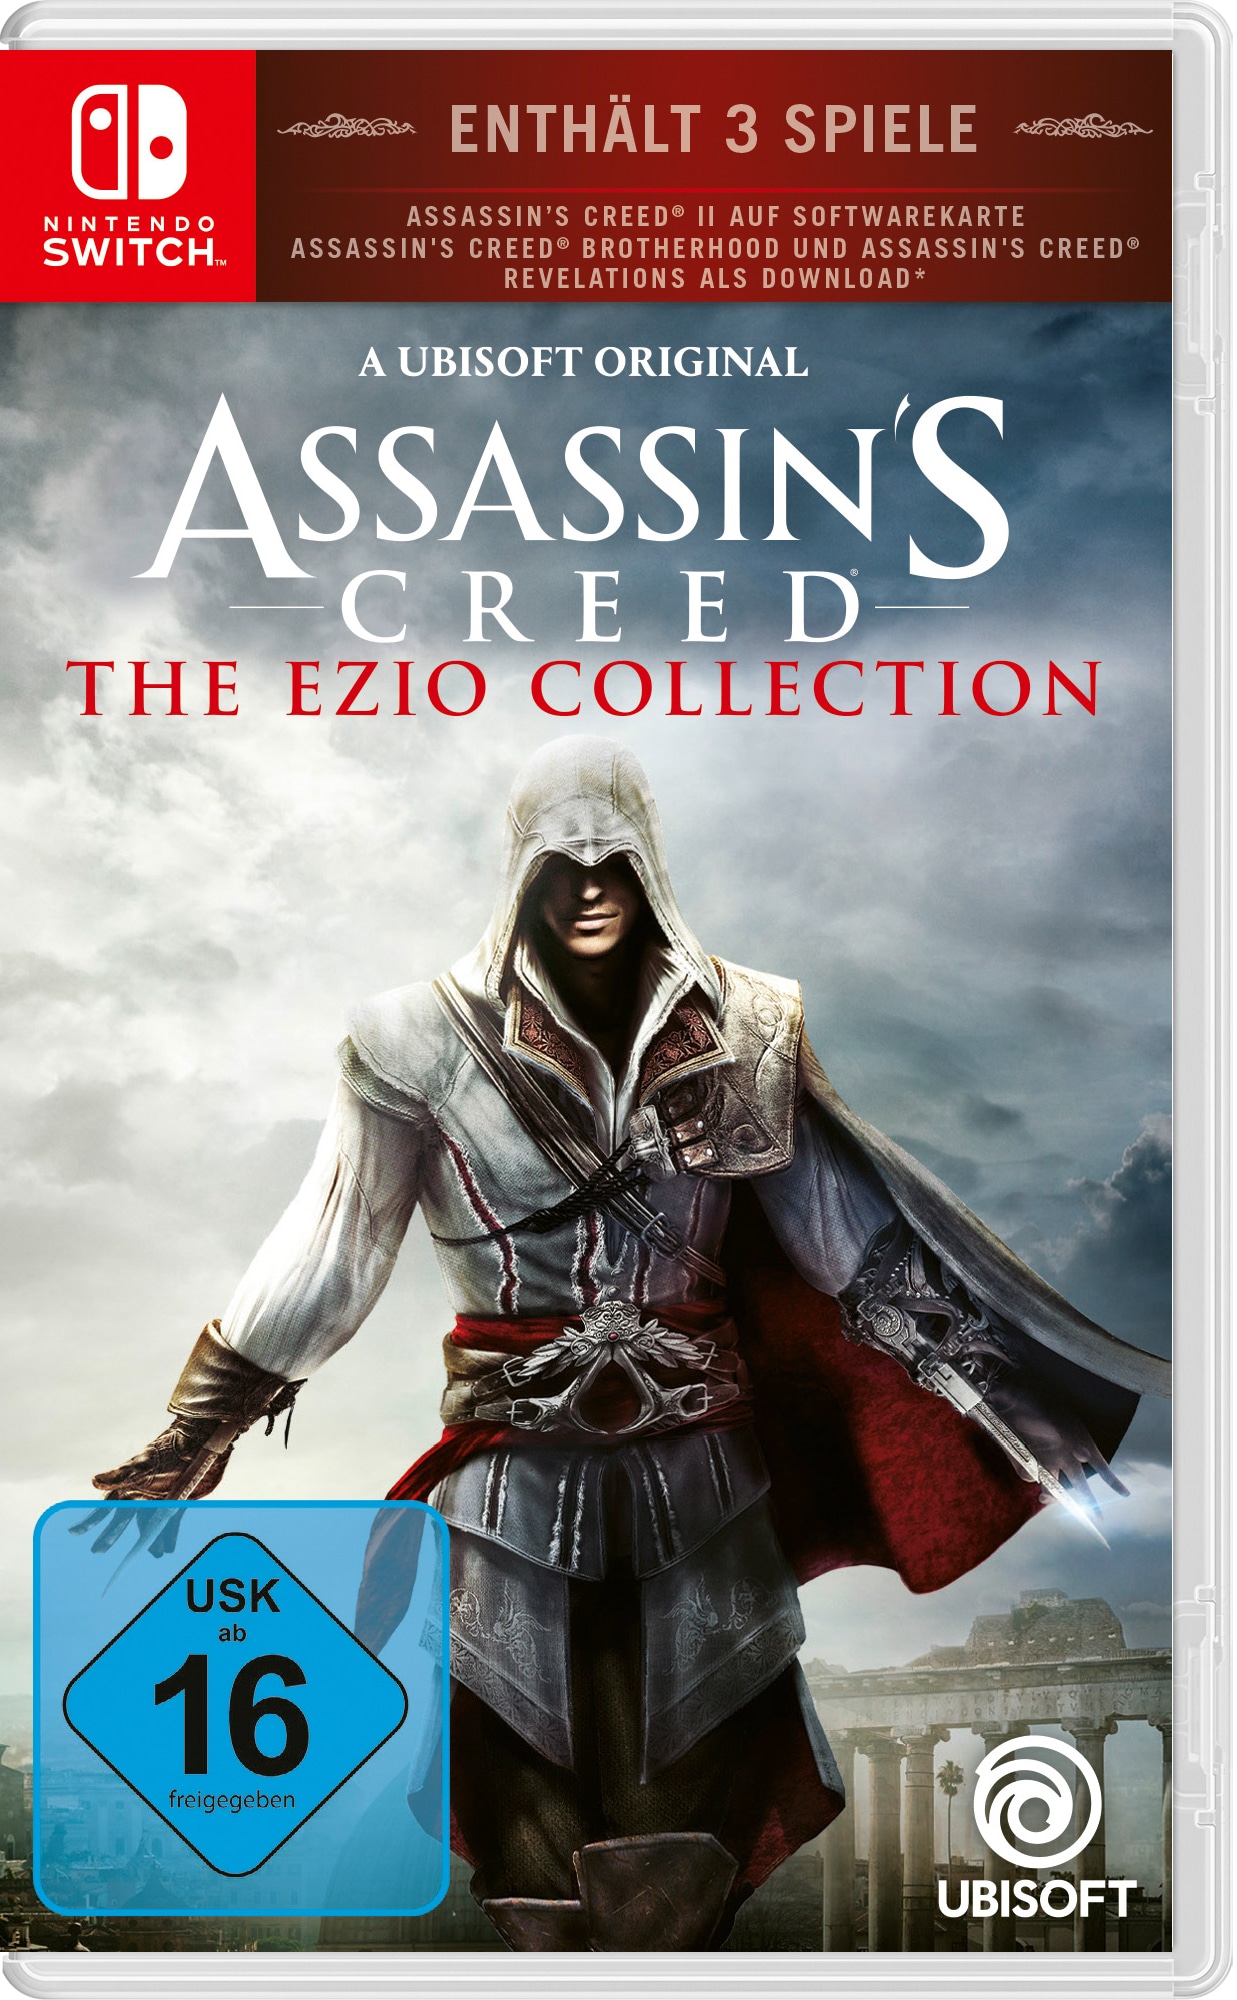 Spielesoftware »Assassin's Creed The Ezio Collection«, Nintendo Switch